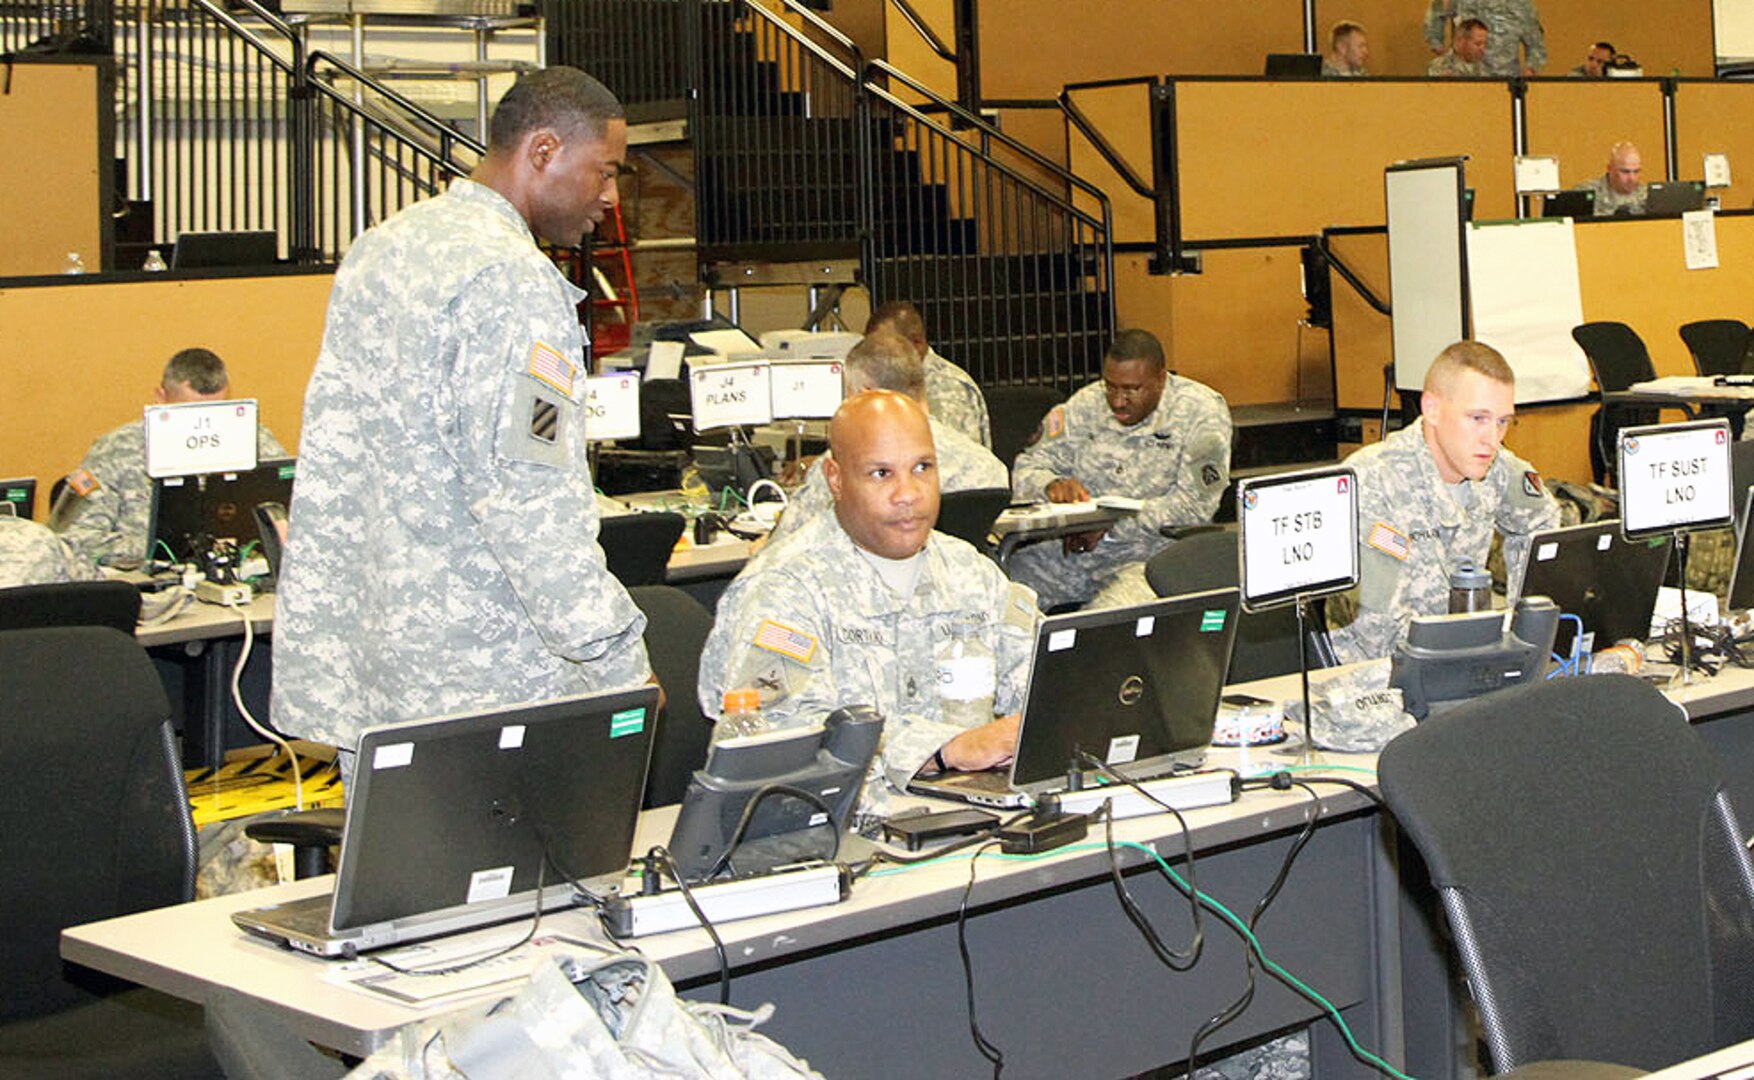 Liaison officers representing the various task forces in support of Task Force 51, U.S. Army North’s rapidly deployable task force, set up a joint operations center Aug. 1 in preparation of exercising their real-world mission capabilities during Vibrant Response 13-2 exercise. VR 13-2 is a major incident exercise conducted by U.S. Northern Command and led by Army North. (Photo by Staff Sgt. Corey Baltos)